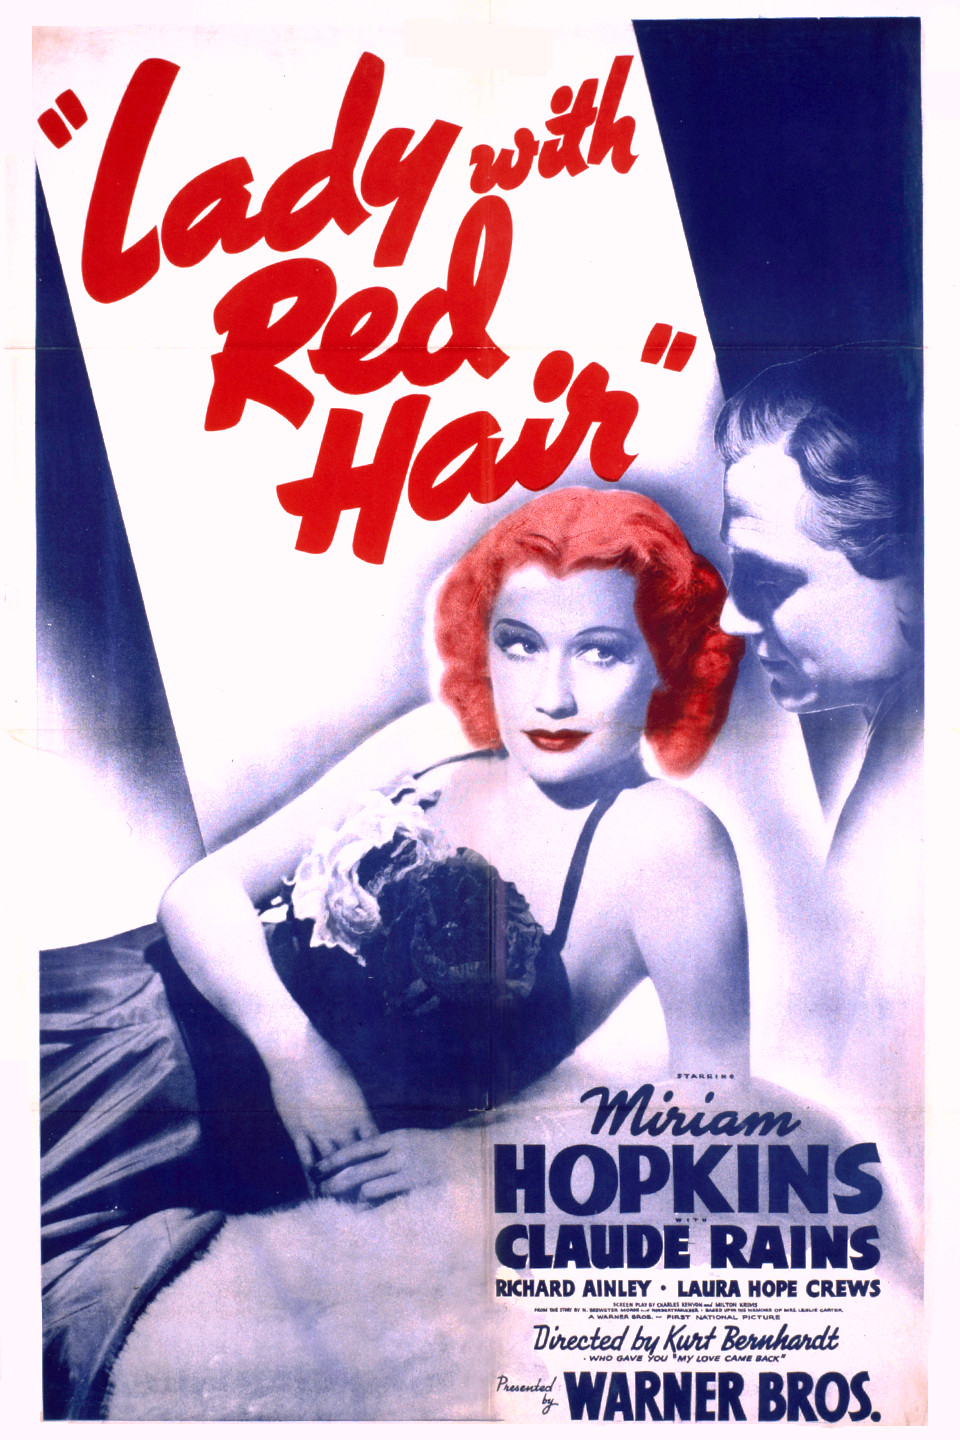 Lady with Red Hair (1940) Screenshot 4 